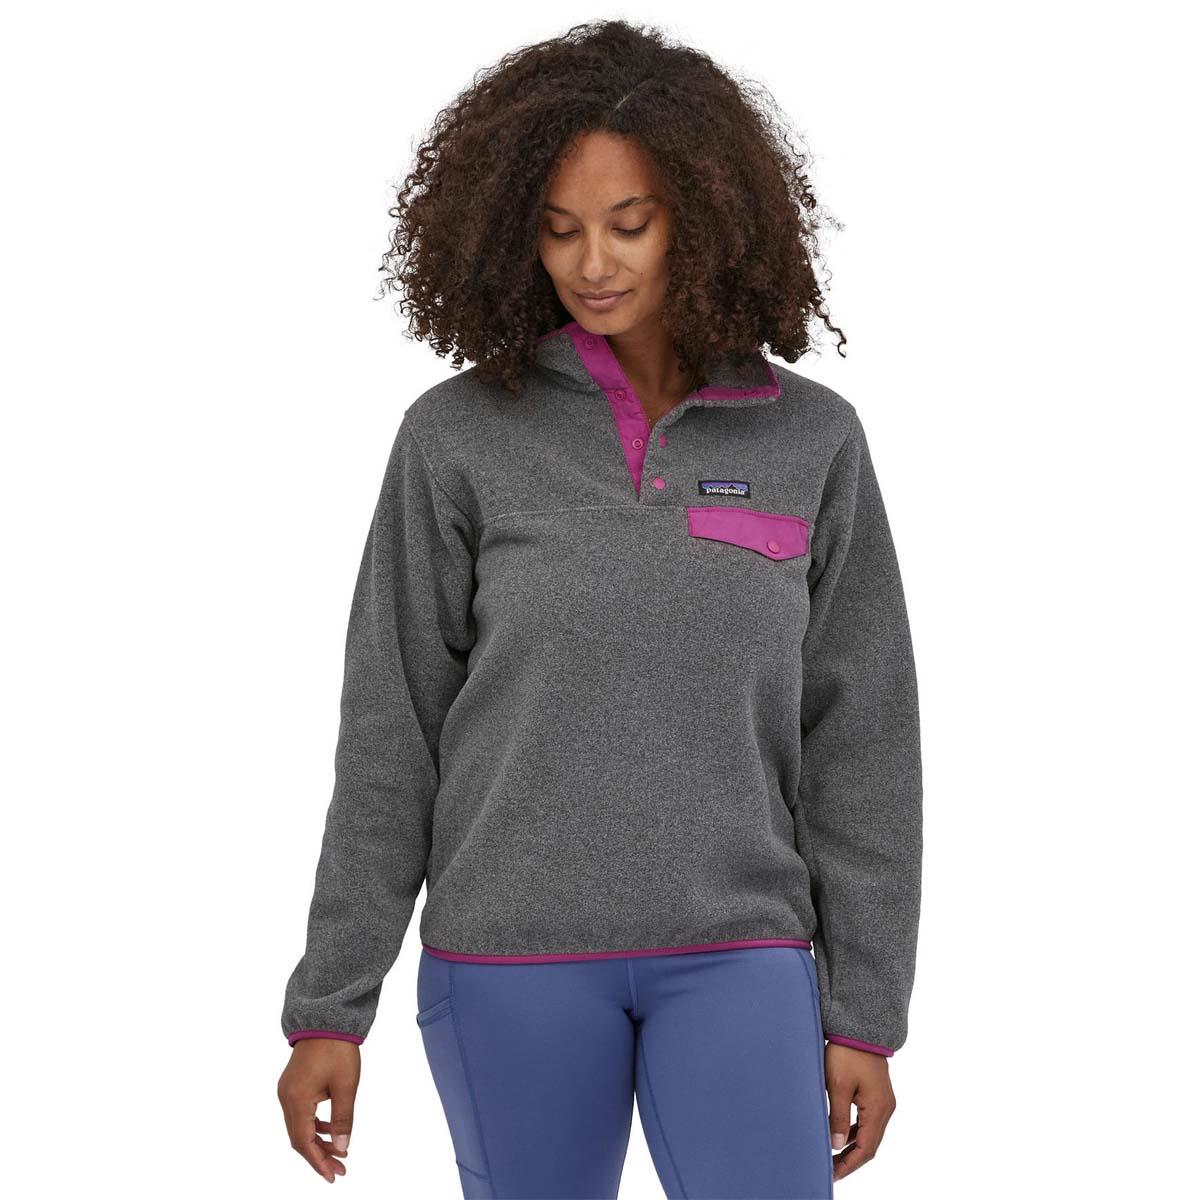 Women's Patagonia Lightweight Synchilla Snap-T Pullover